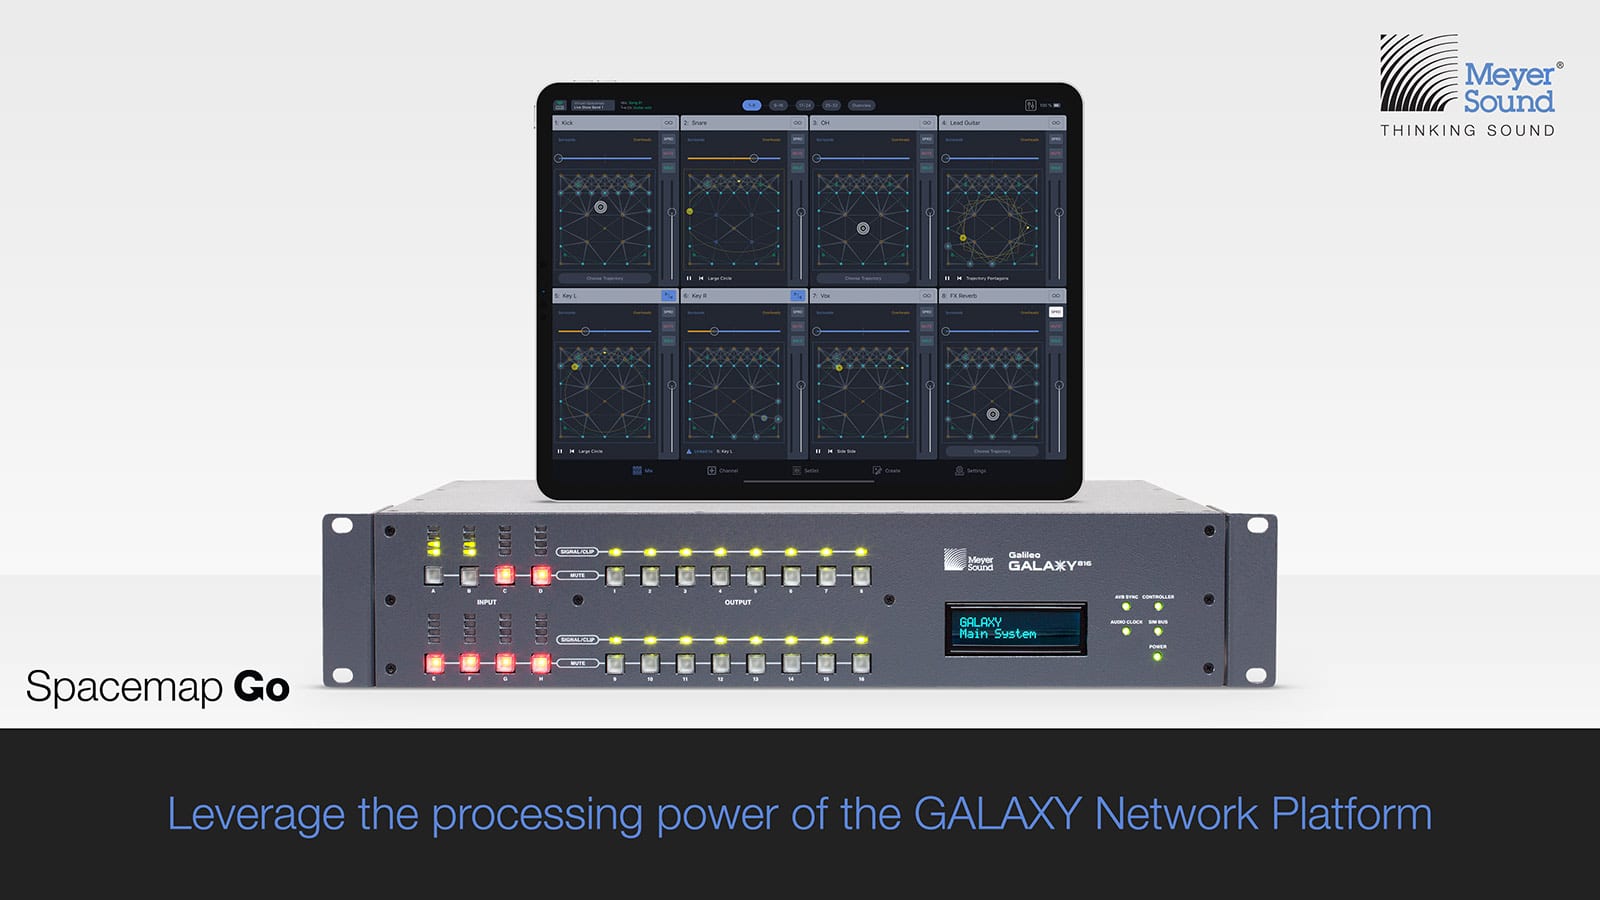 Meyer Sound Launches Spacemap Go, a Breakthrough Tool for Spatial Sound Design and Mixing